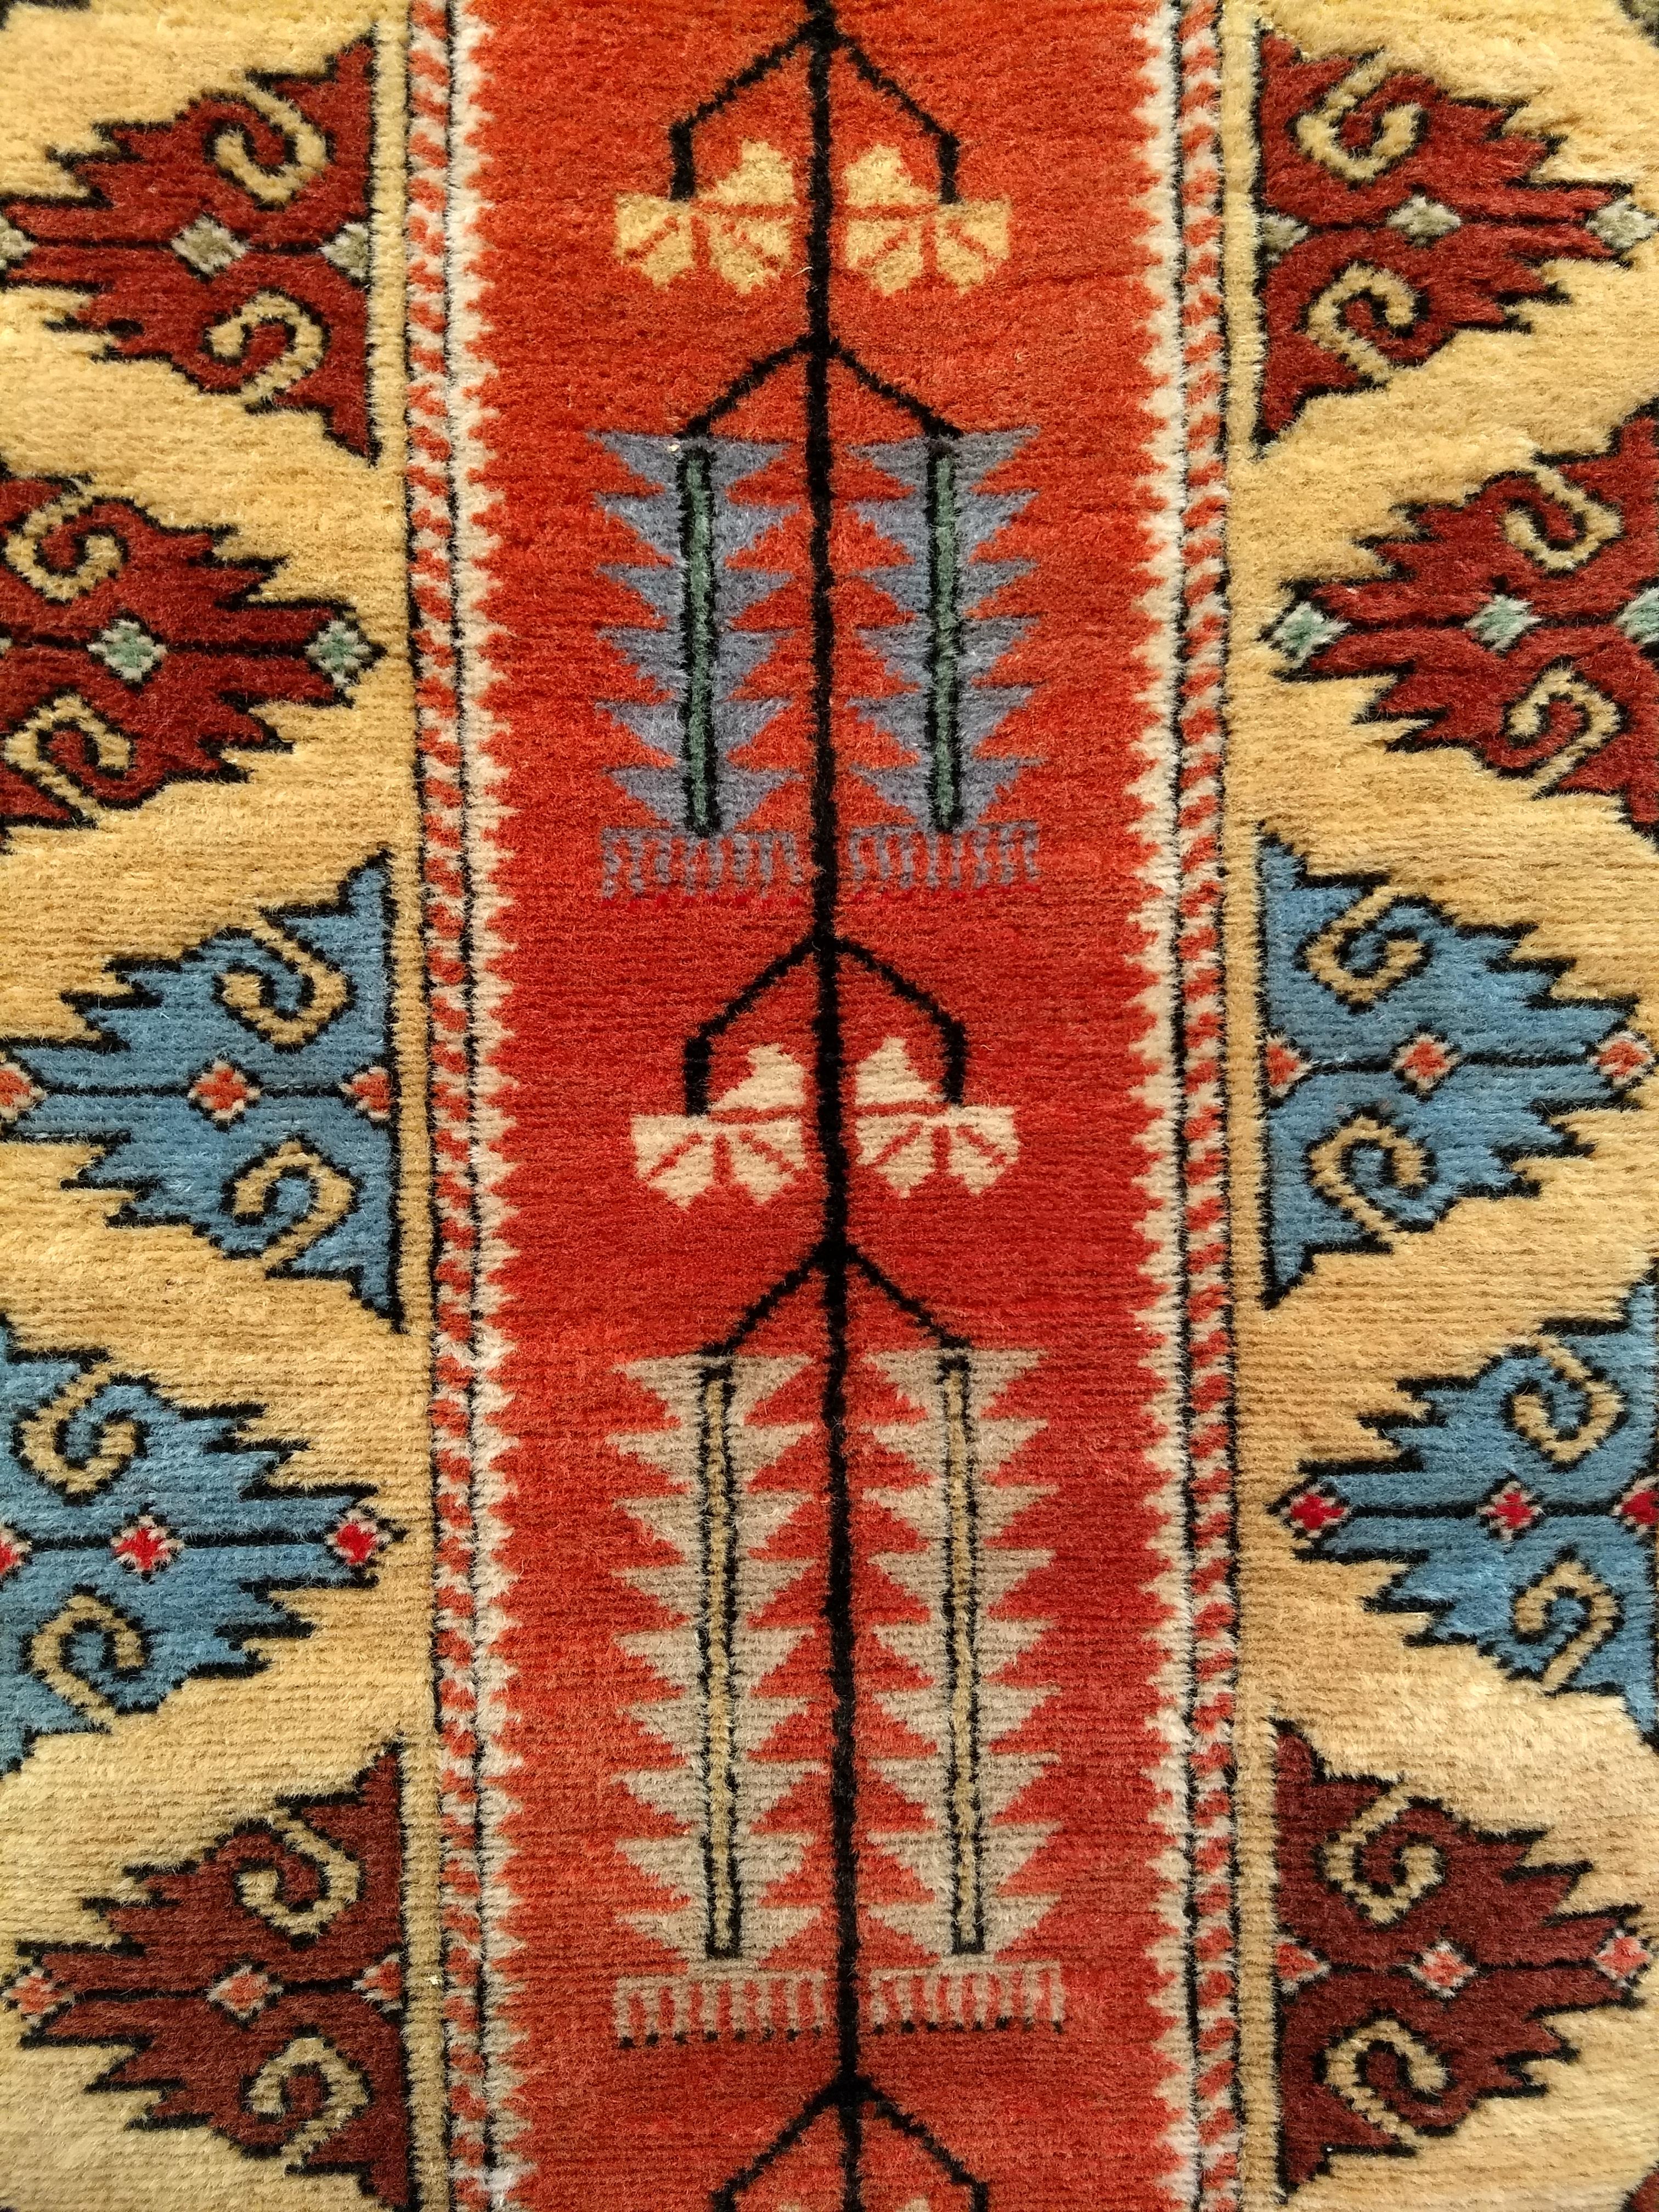 A vintage Turkish Oushak colorful runner in a geometric design from the mid-1900s. The rug has a modern design and beautiful bright colors including green, blue, brown, yellow, pink, and red colors in the field and the border. The center of the